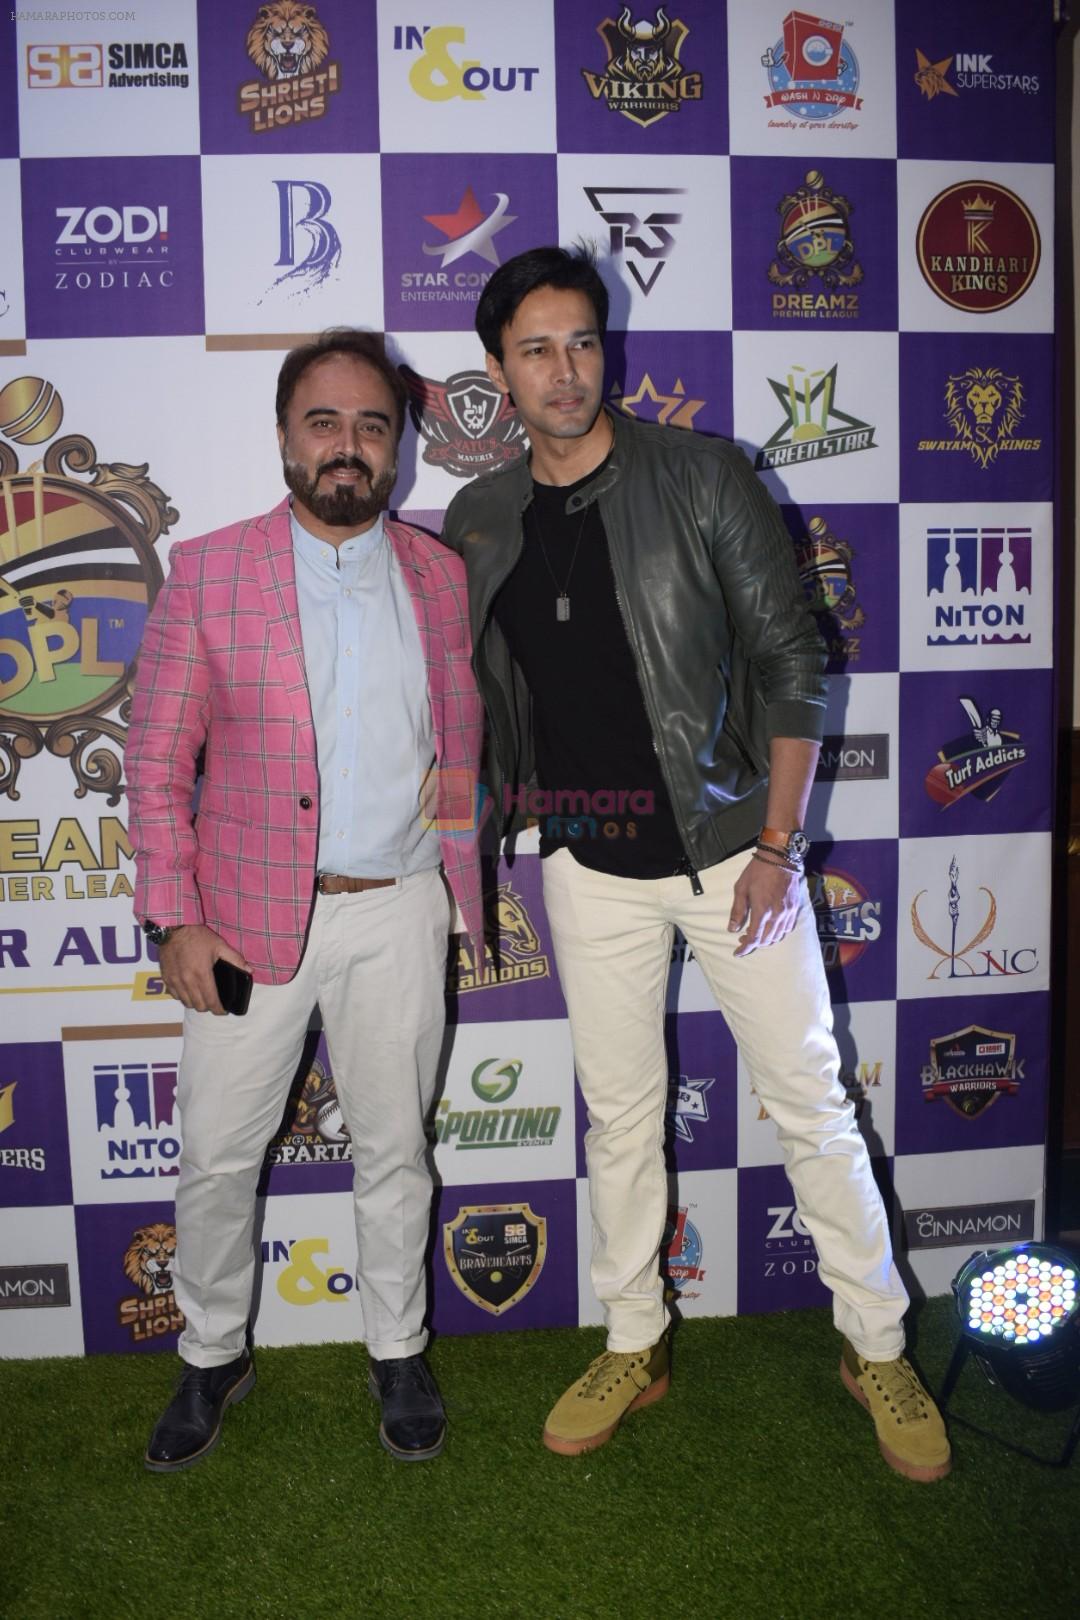 Rajneesh Duggal at Dreamz Premiere Legue players auction in ITC Grand Central in parel on 15th Dec 2018